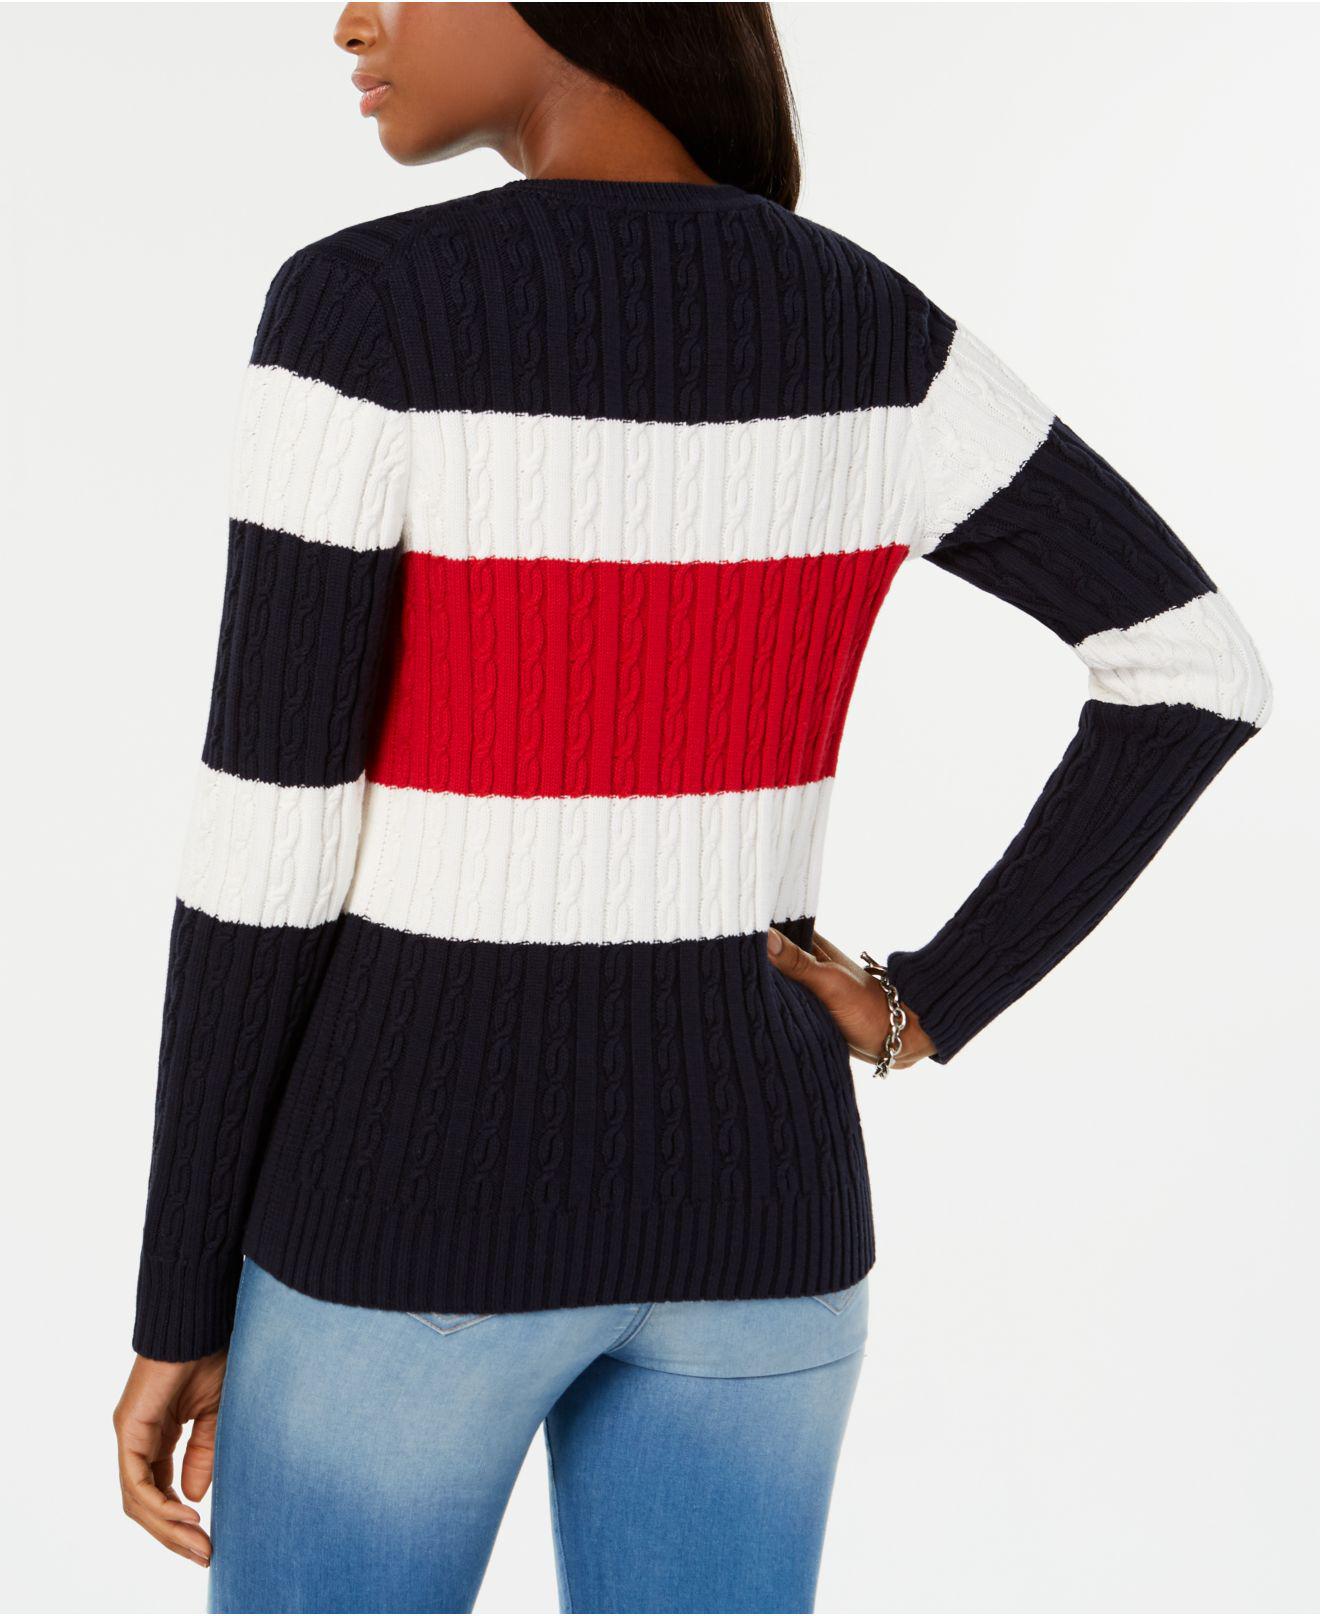 Lyst - Tommy Hilfiger Cotton Colorblocked Sweater, Created For Macy's